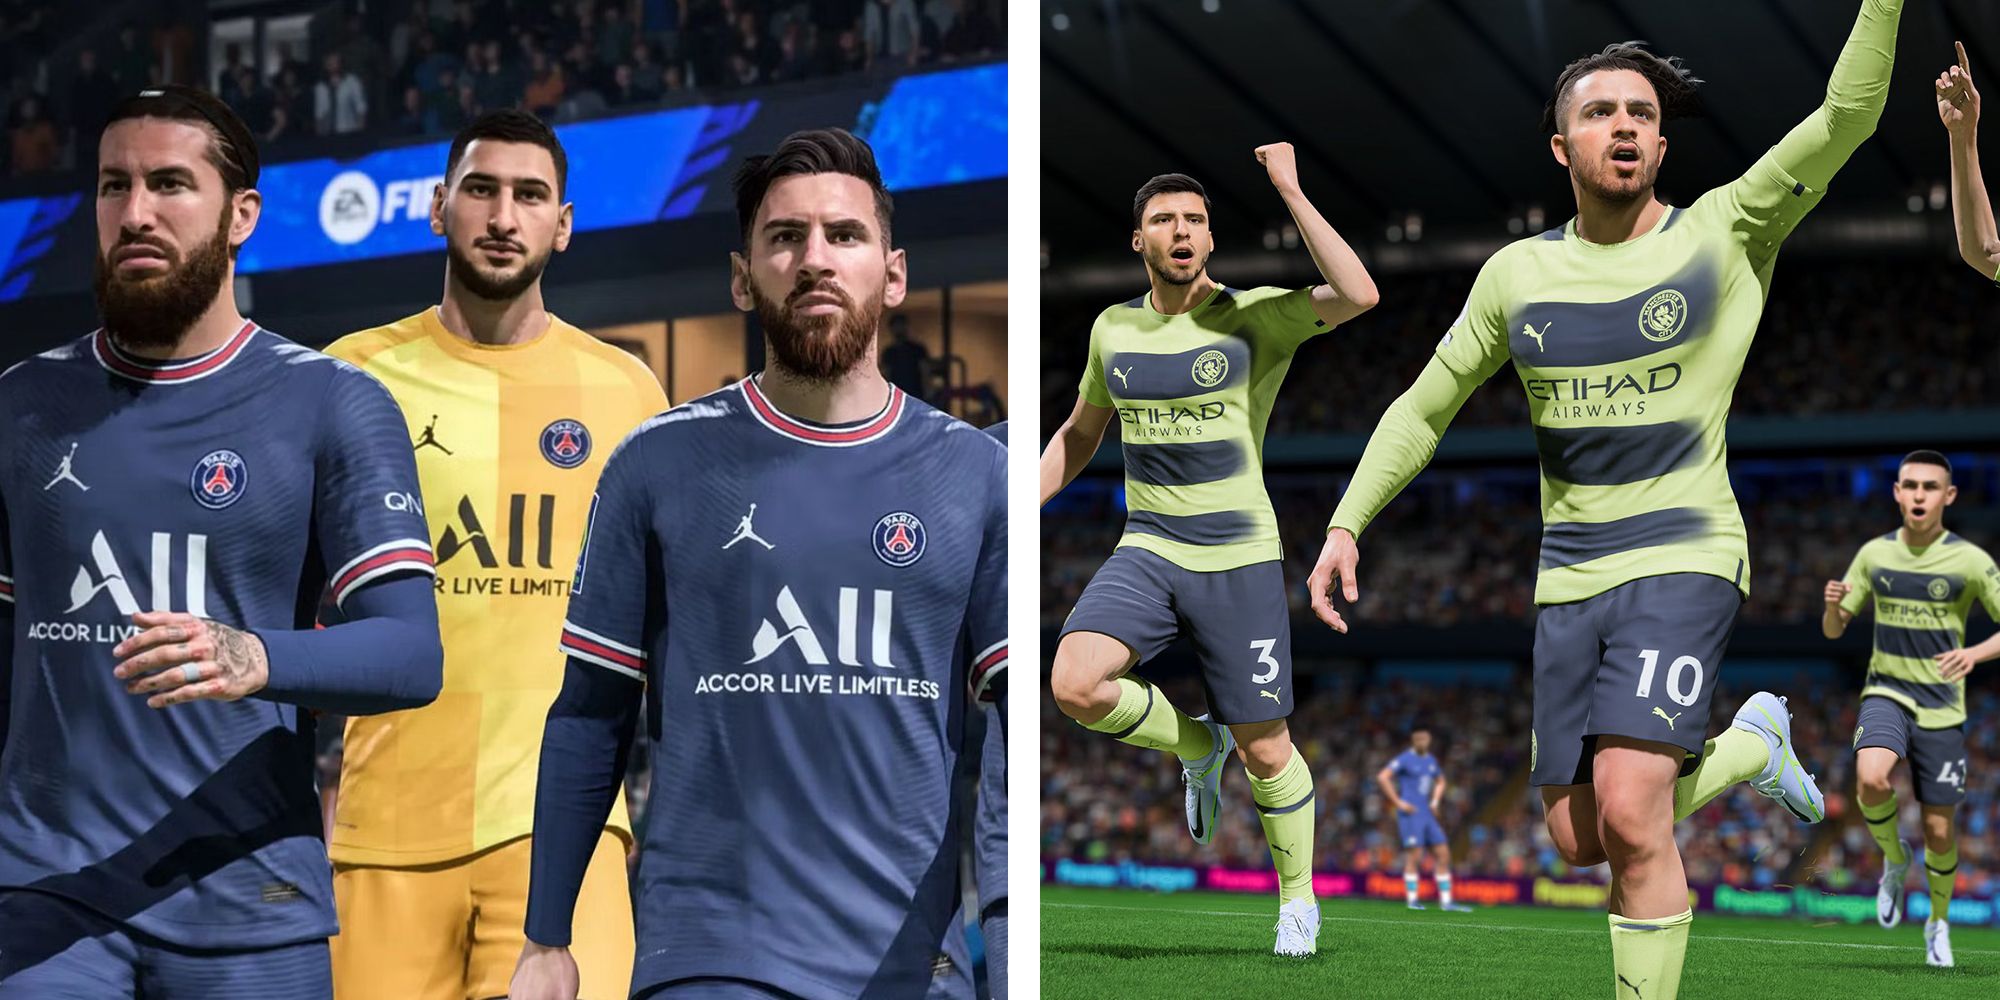 FIFA 23: The 10 greatest FIFA games of all time ranked ahead of